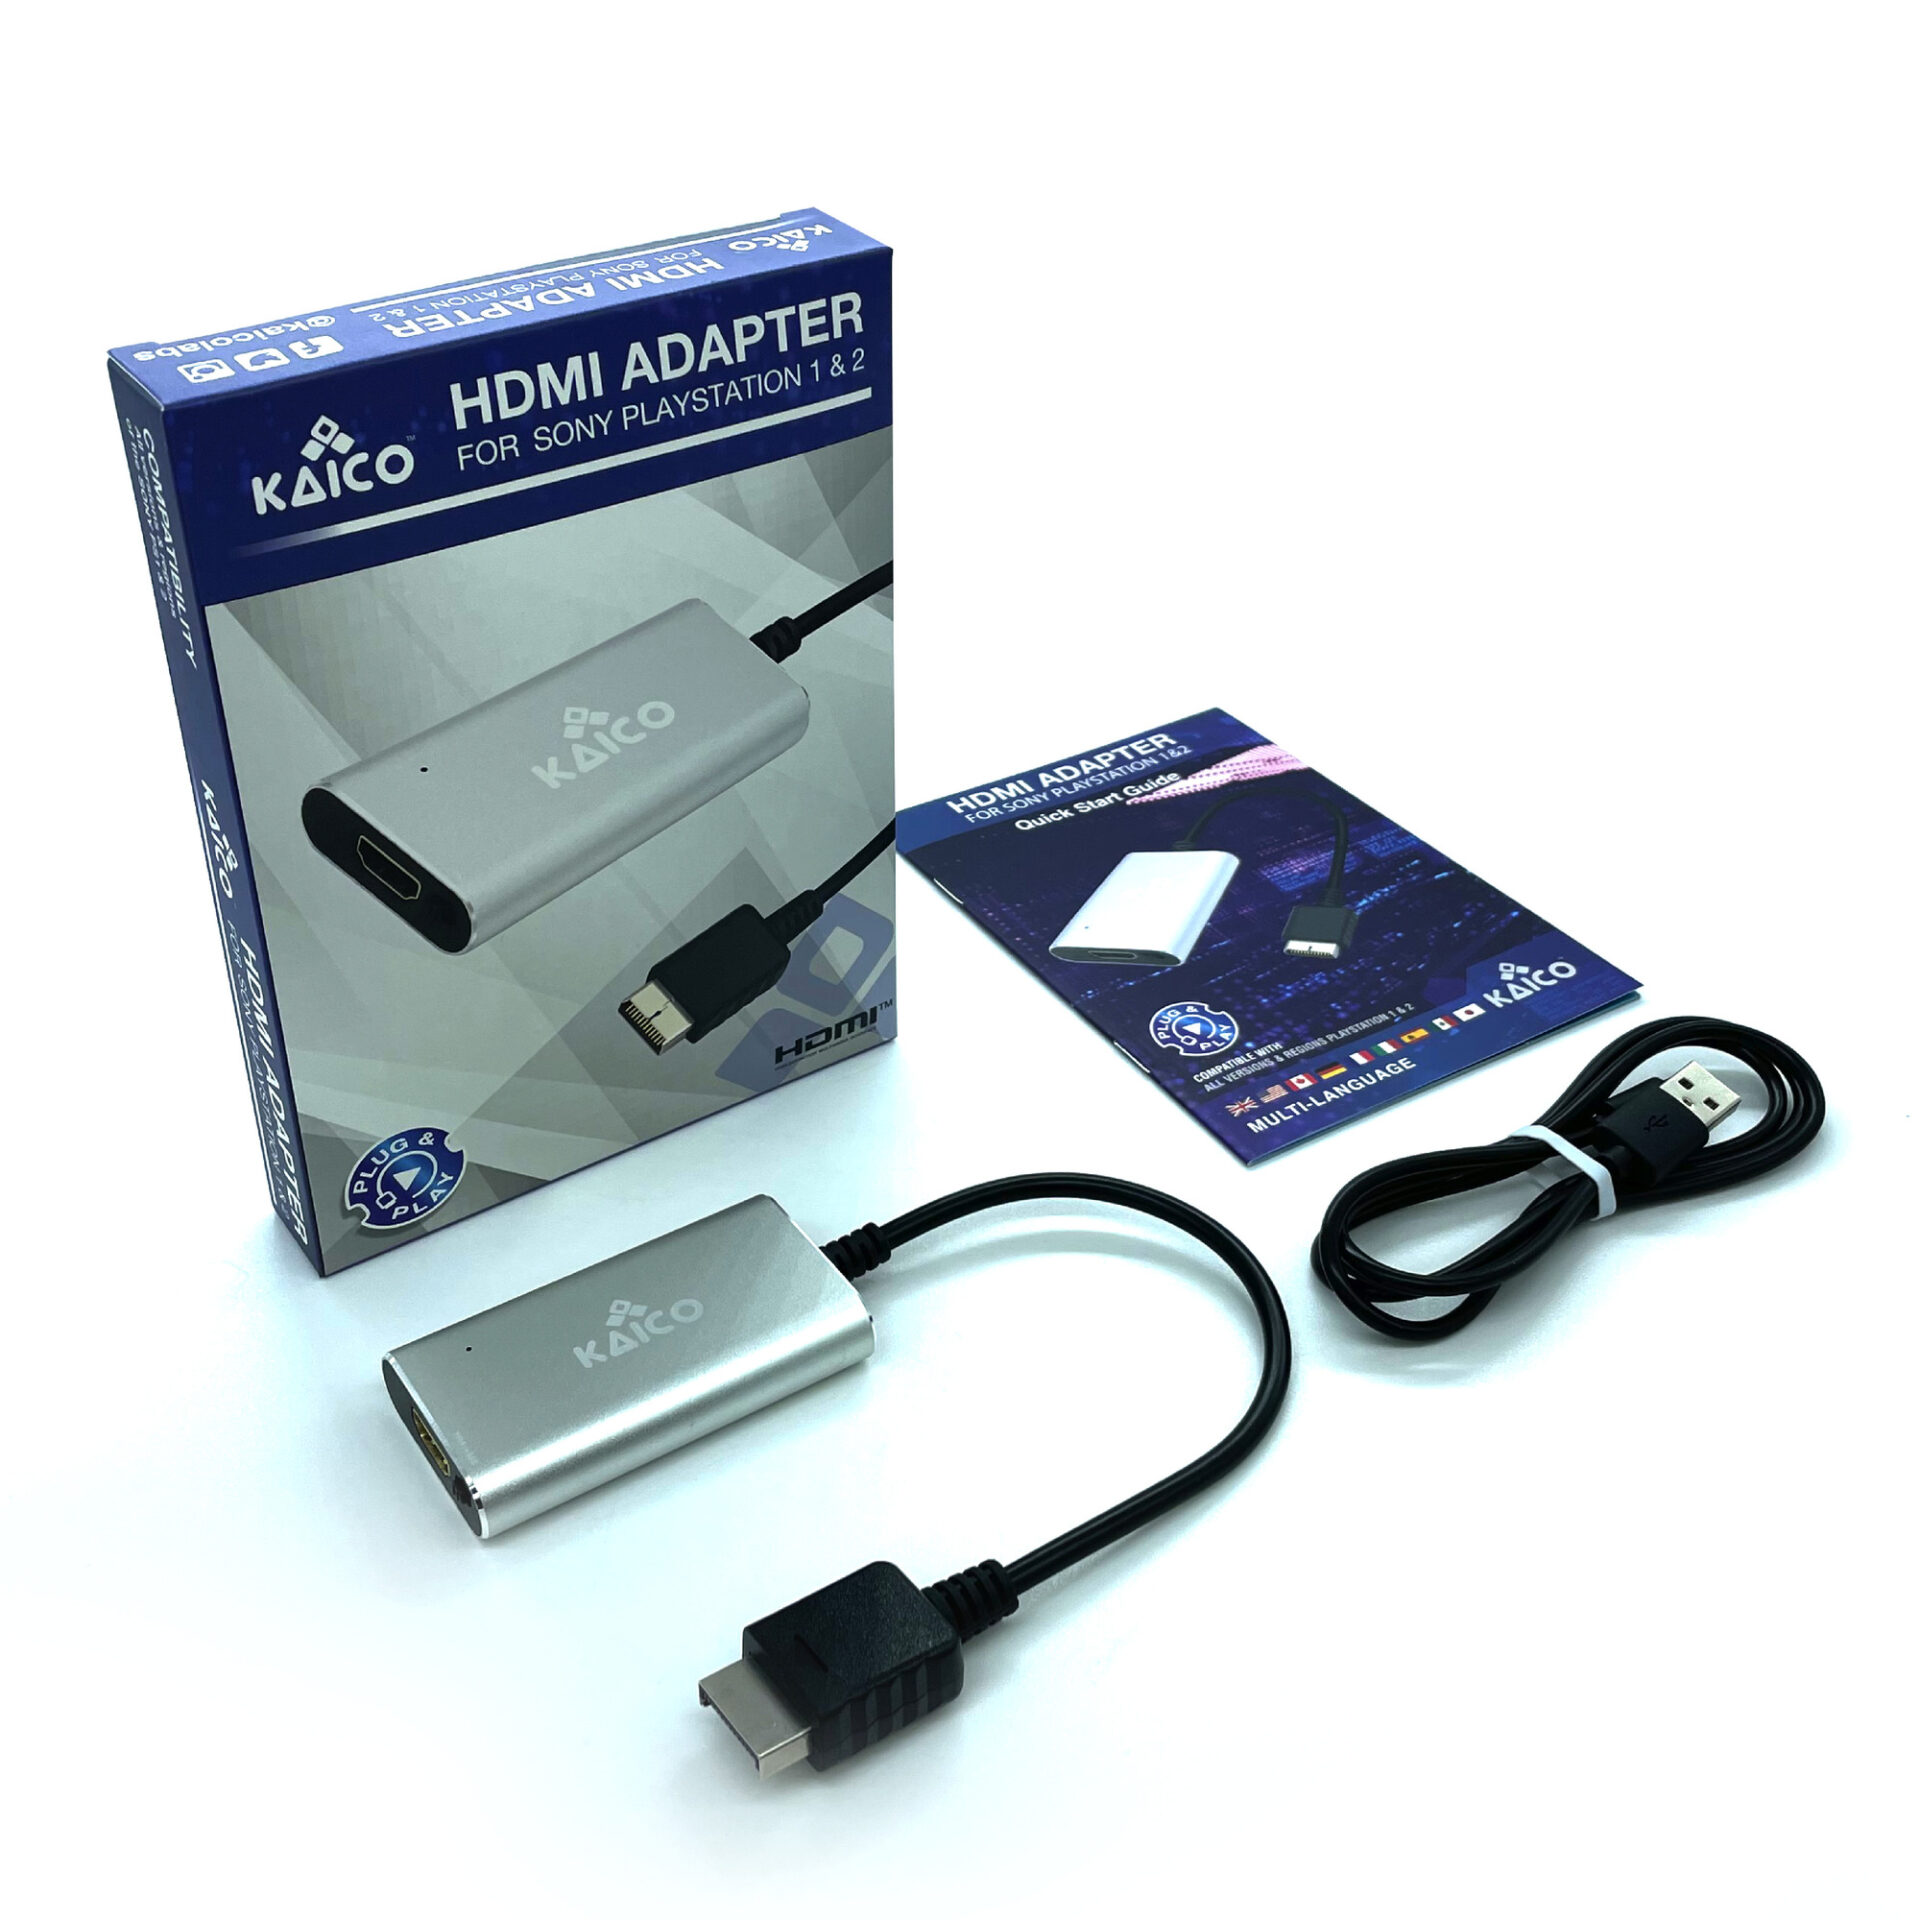 Sony PlayStation 1 & 2 HDMI Display Adapter & Converter Cable